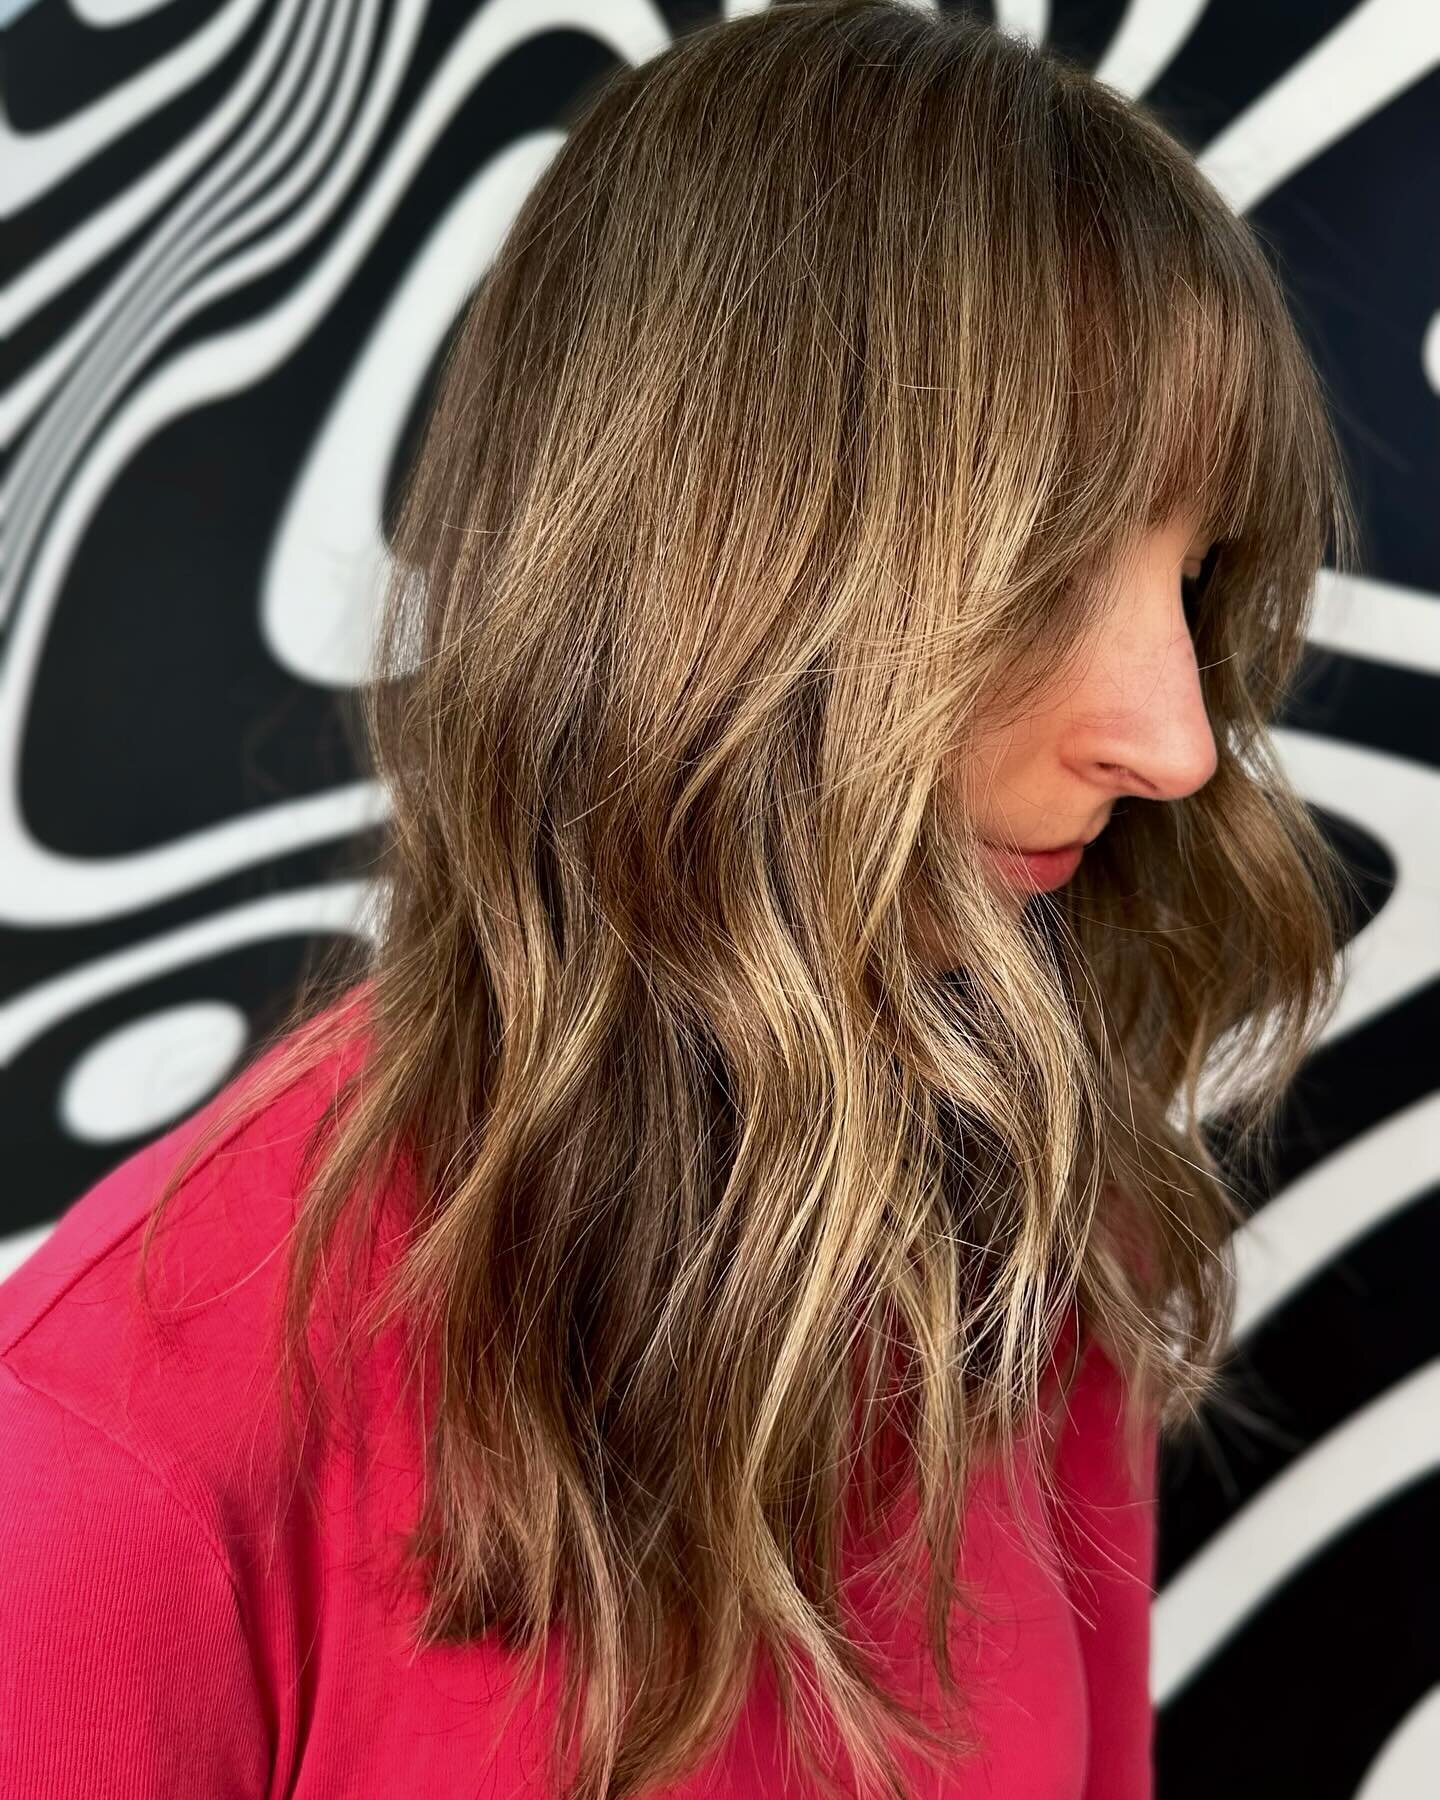 we checked off all the boxes:
✅ softer grow out = root melt
✅ more dimension = lowlights 
✅ blend the grays = babylights 
✅ keep it blonde on the ends = fresh glaze
✅ + add some bangs!